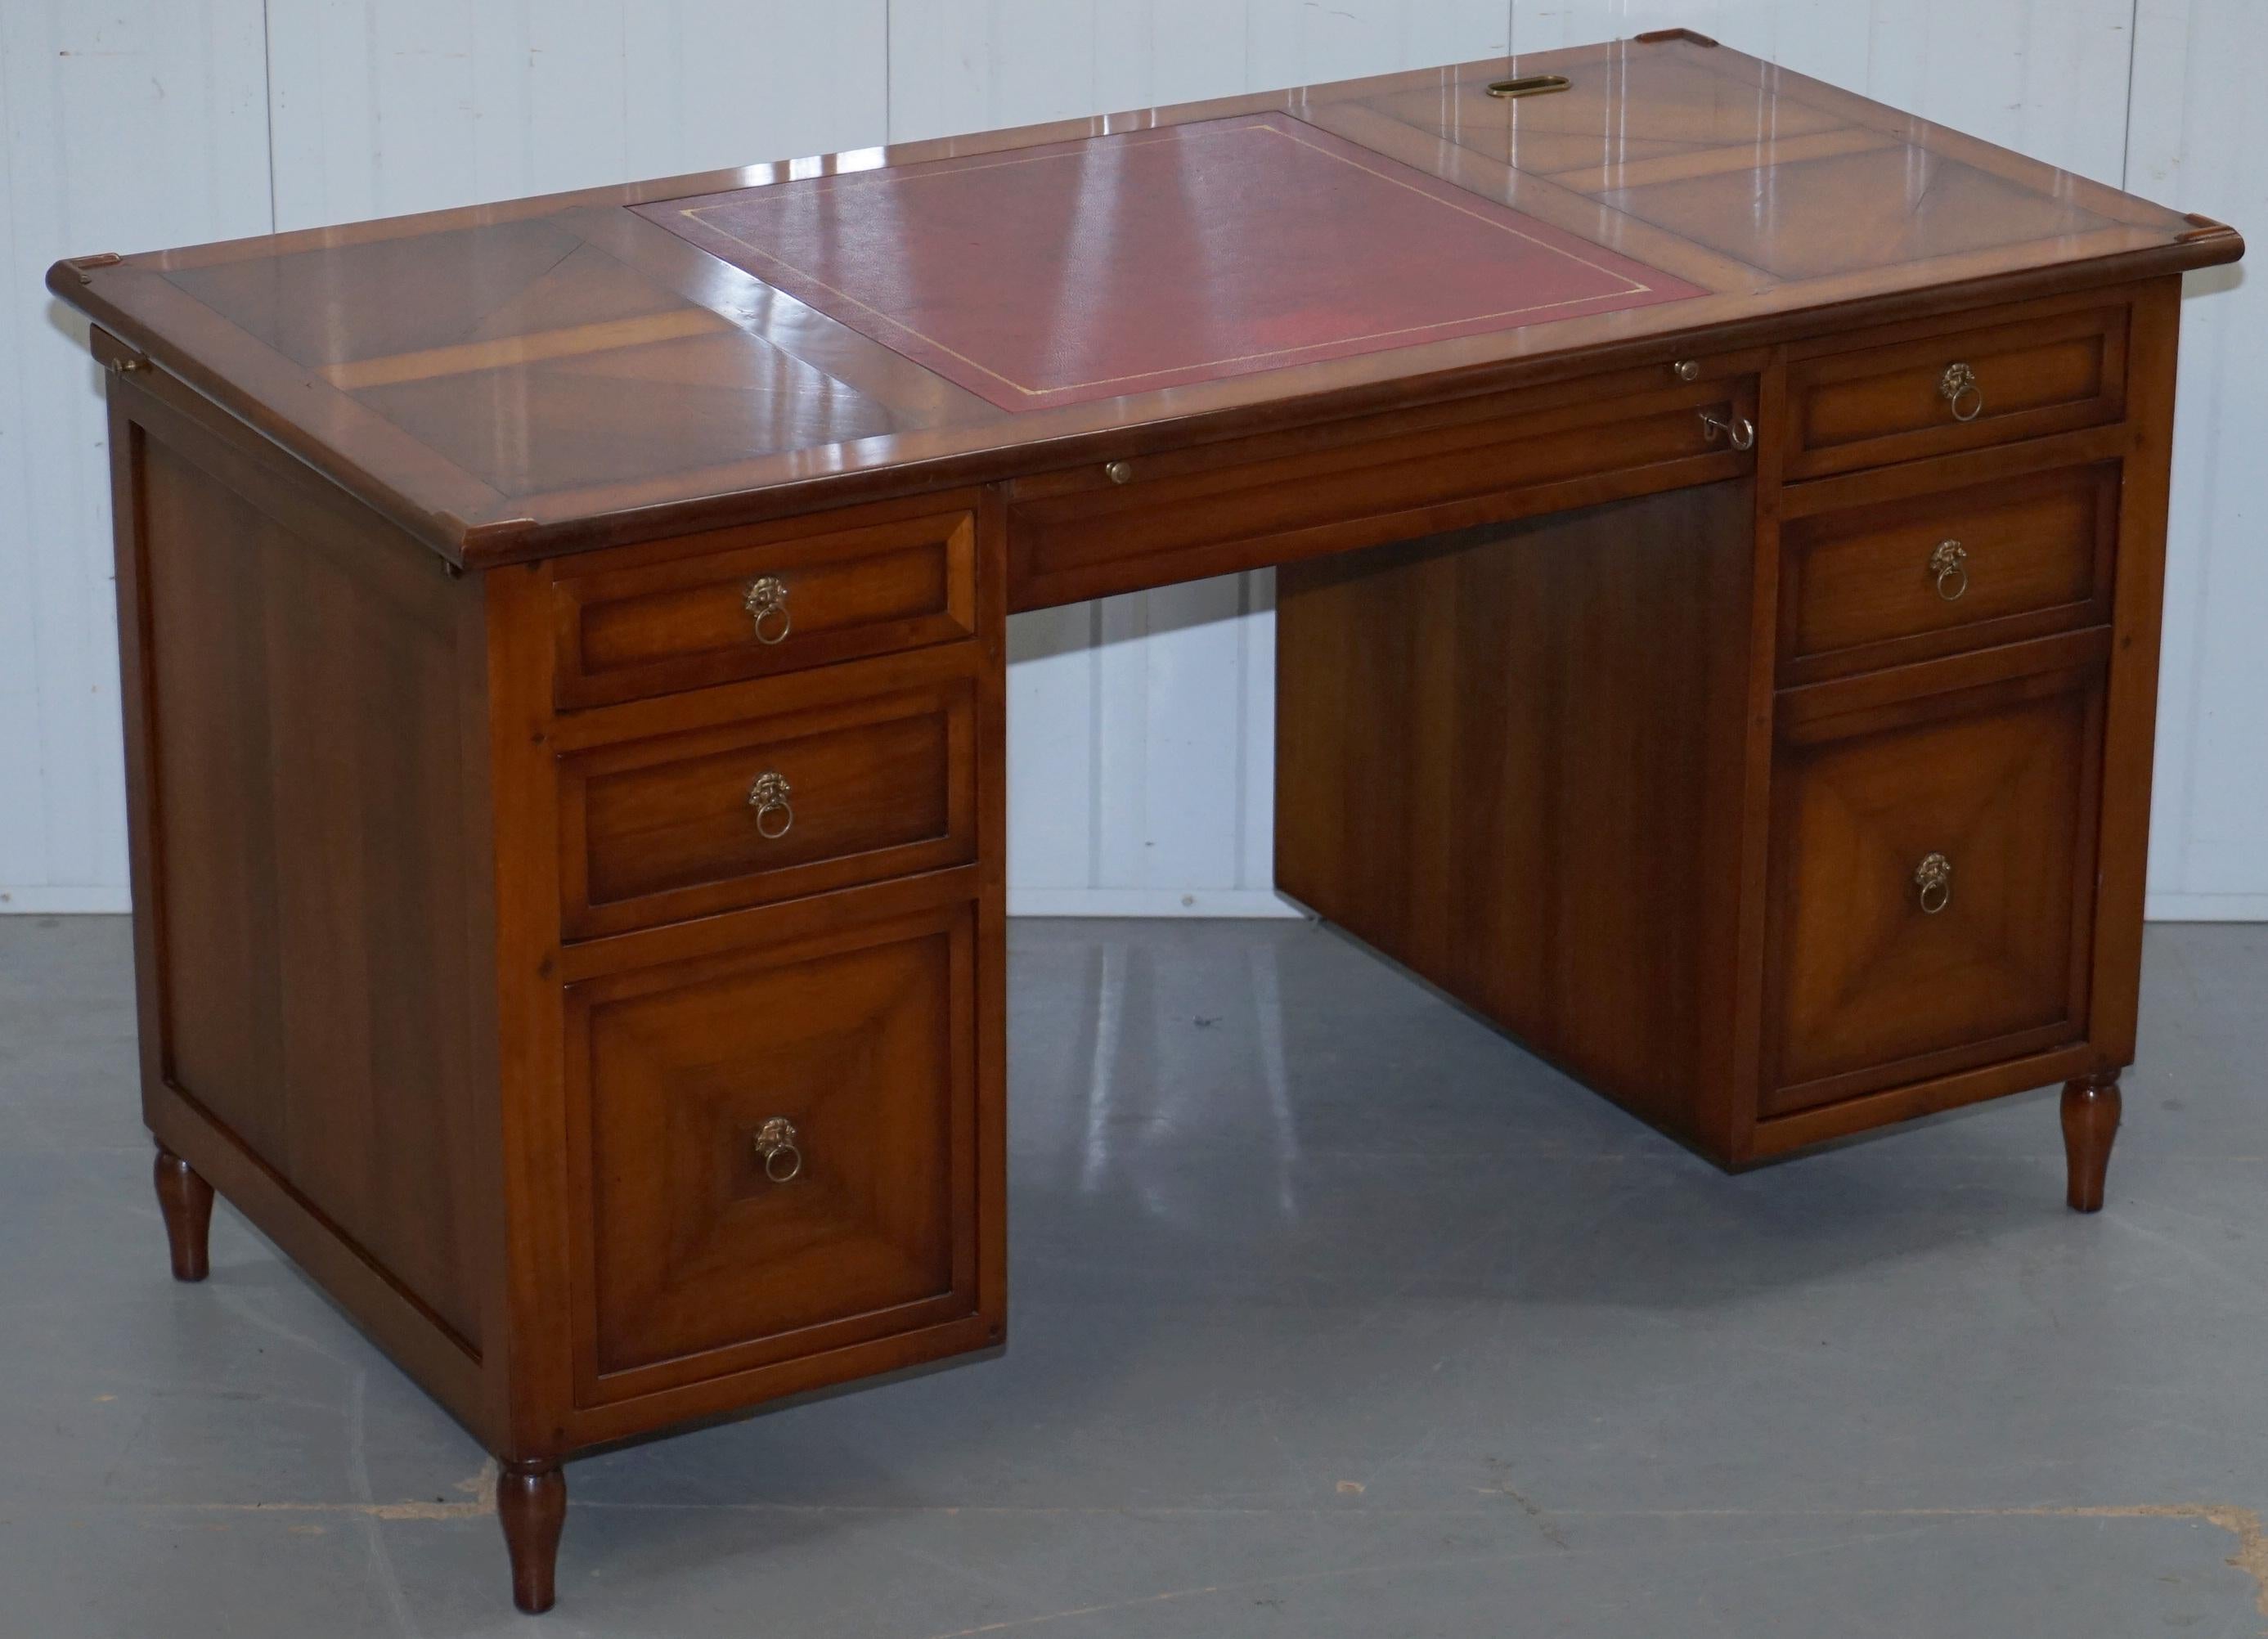 Wimbledon-Furniture

Wimbledon-Furniture is delighted to offer for sale this stunning hand made in Italy Assi D’Asolo custom made partner desk with oxblood leather top specially designed to house and hide a computer RRP £5000

Please note the